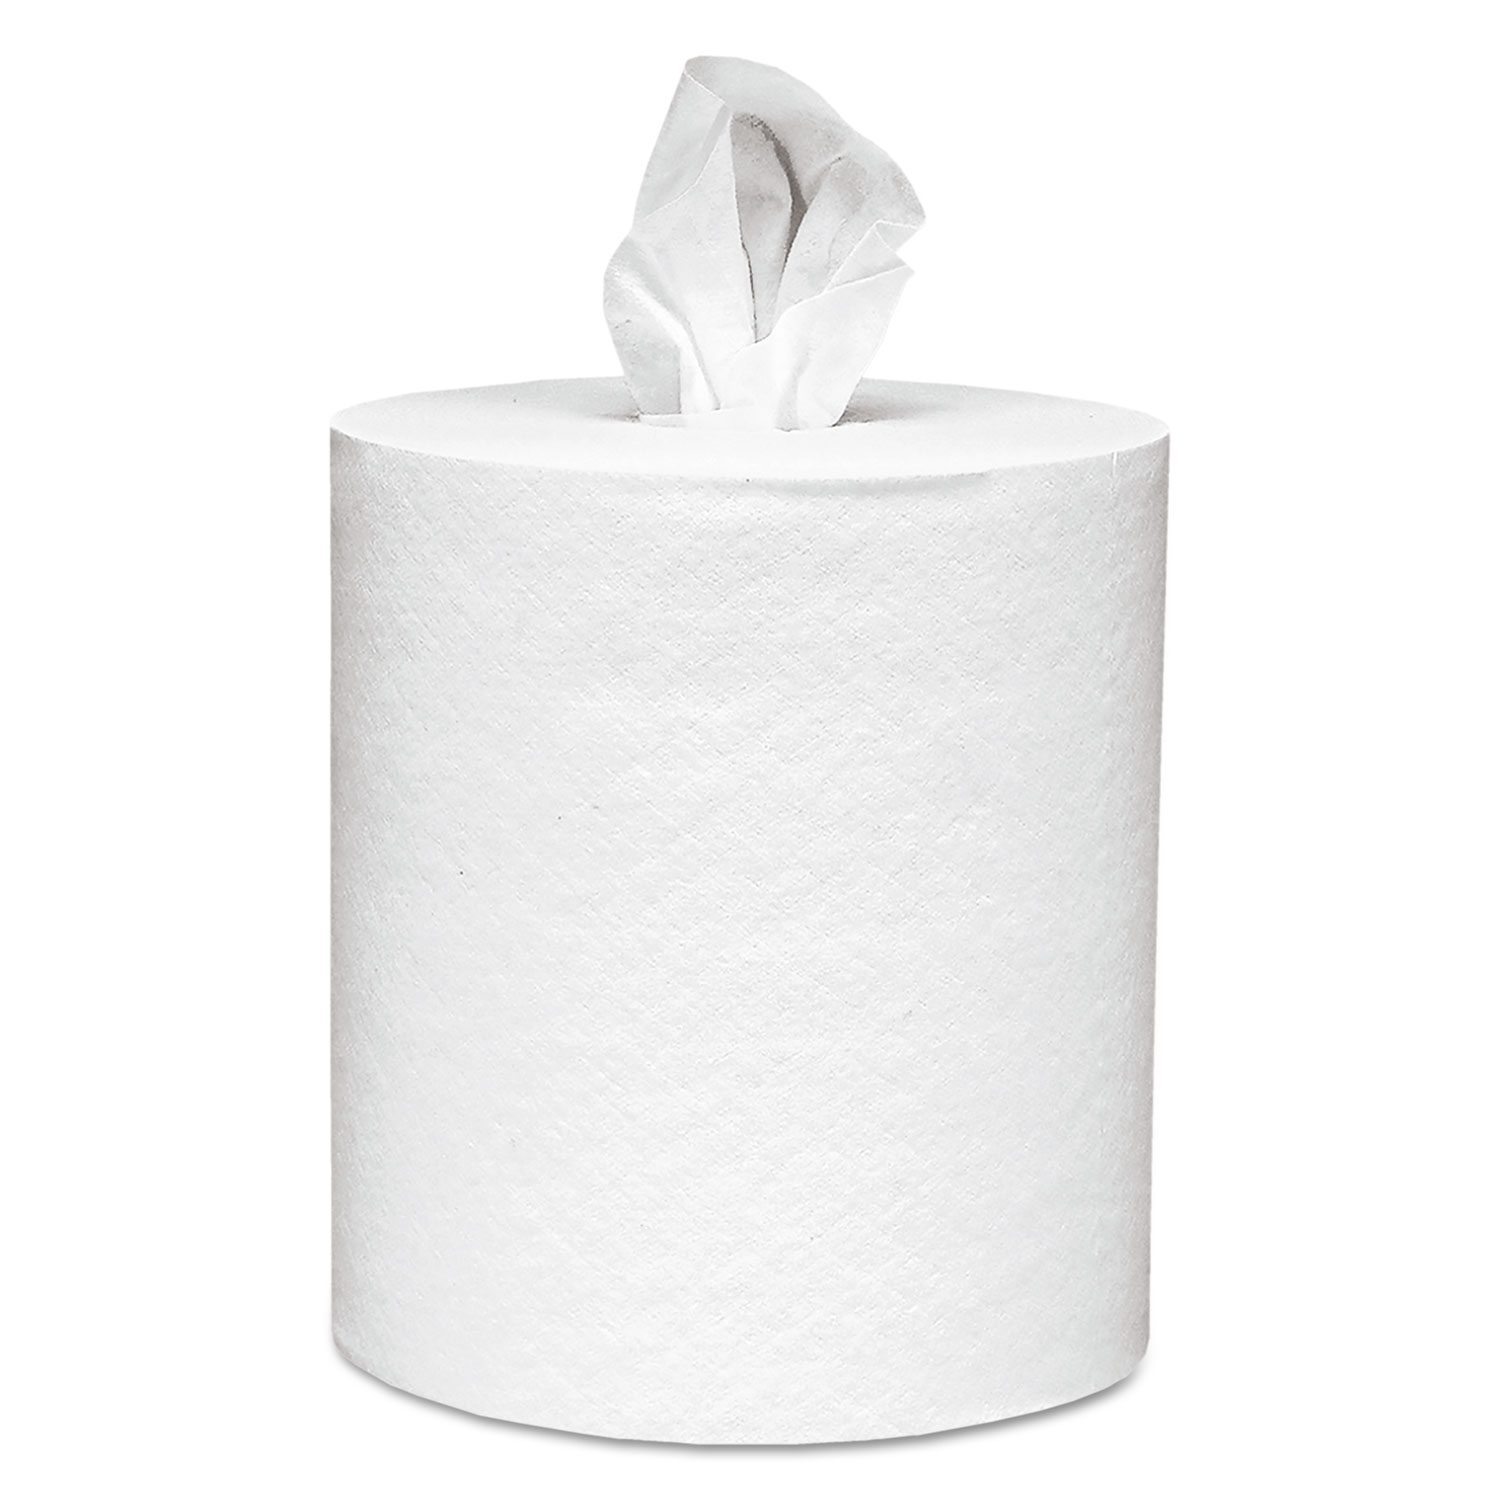  Scott 1051 Essential Center-Pull Towels, Absorbency Pockets, 1 Ply, 8x15, 500/Roll, 4 Rl/CT (KCC01051) 